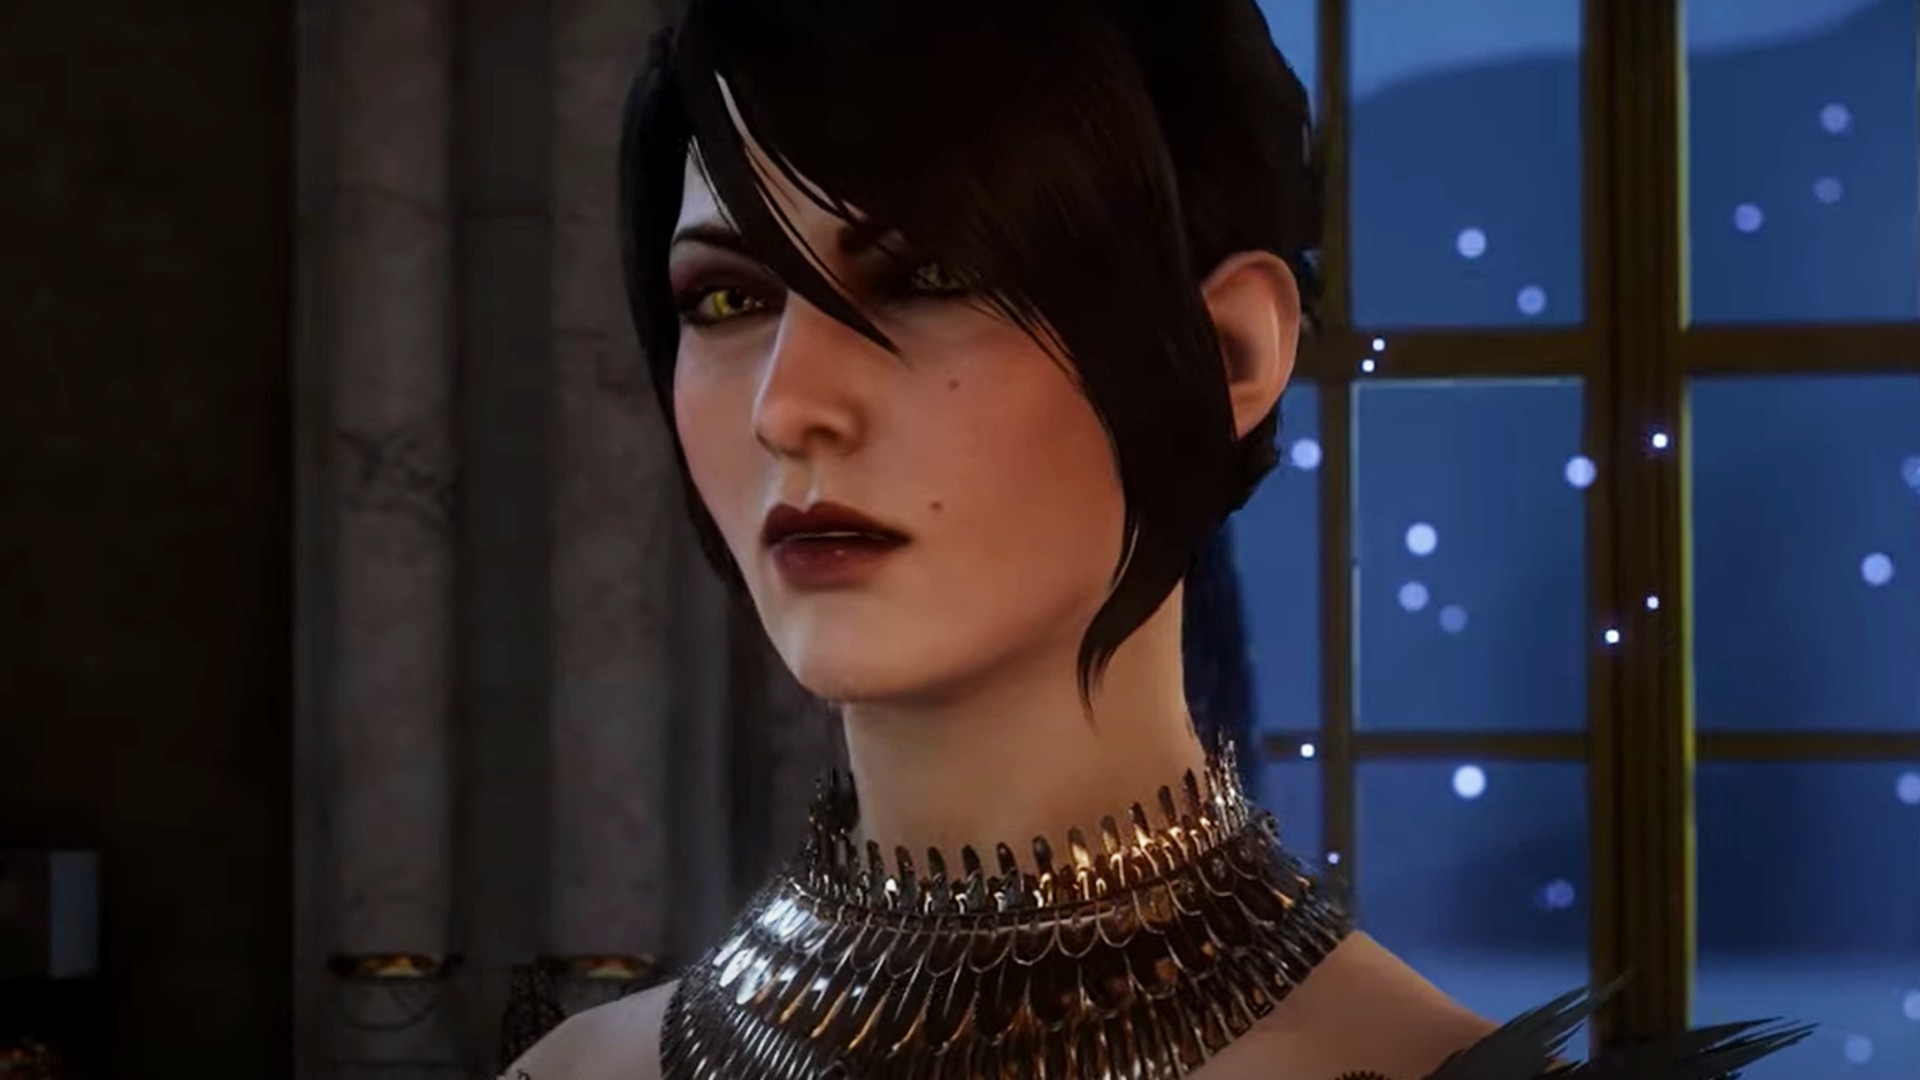 Dragon Age: Inquisition is Bioware's most successful launch ever